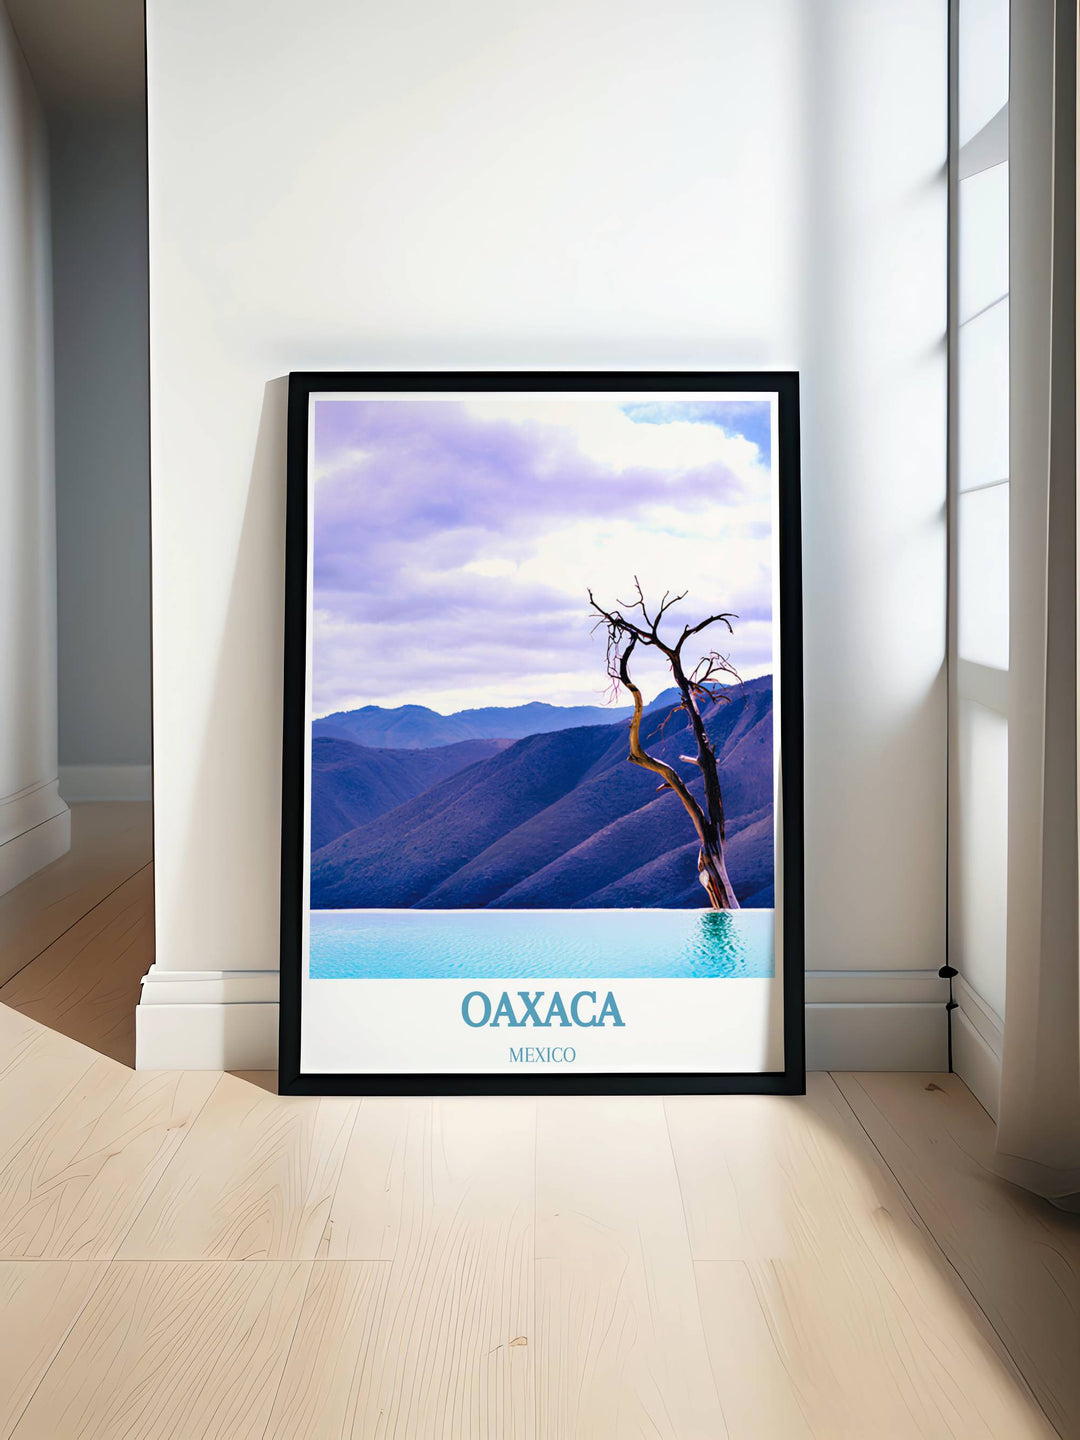 Hierve el Agua fine art print showing the unique petrified waterfalls and mineral pools of Oaxaca, perfect for adding a touch of natural wonder to any room.